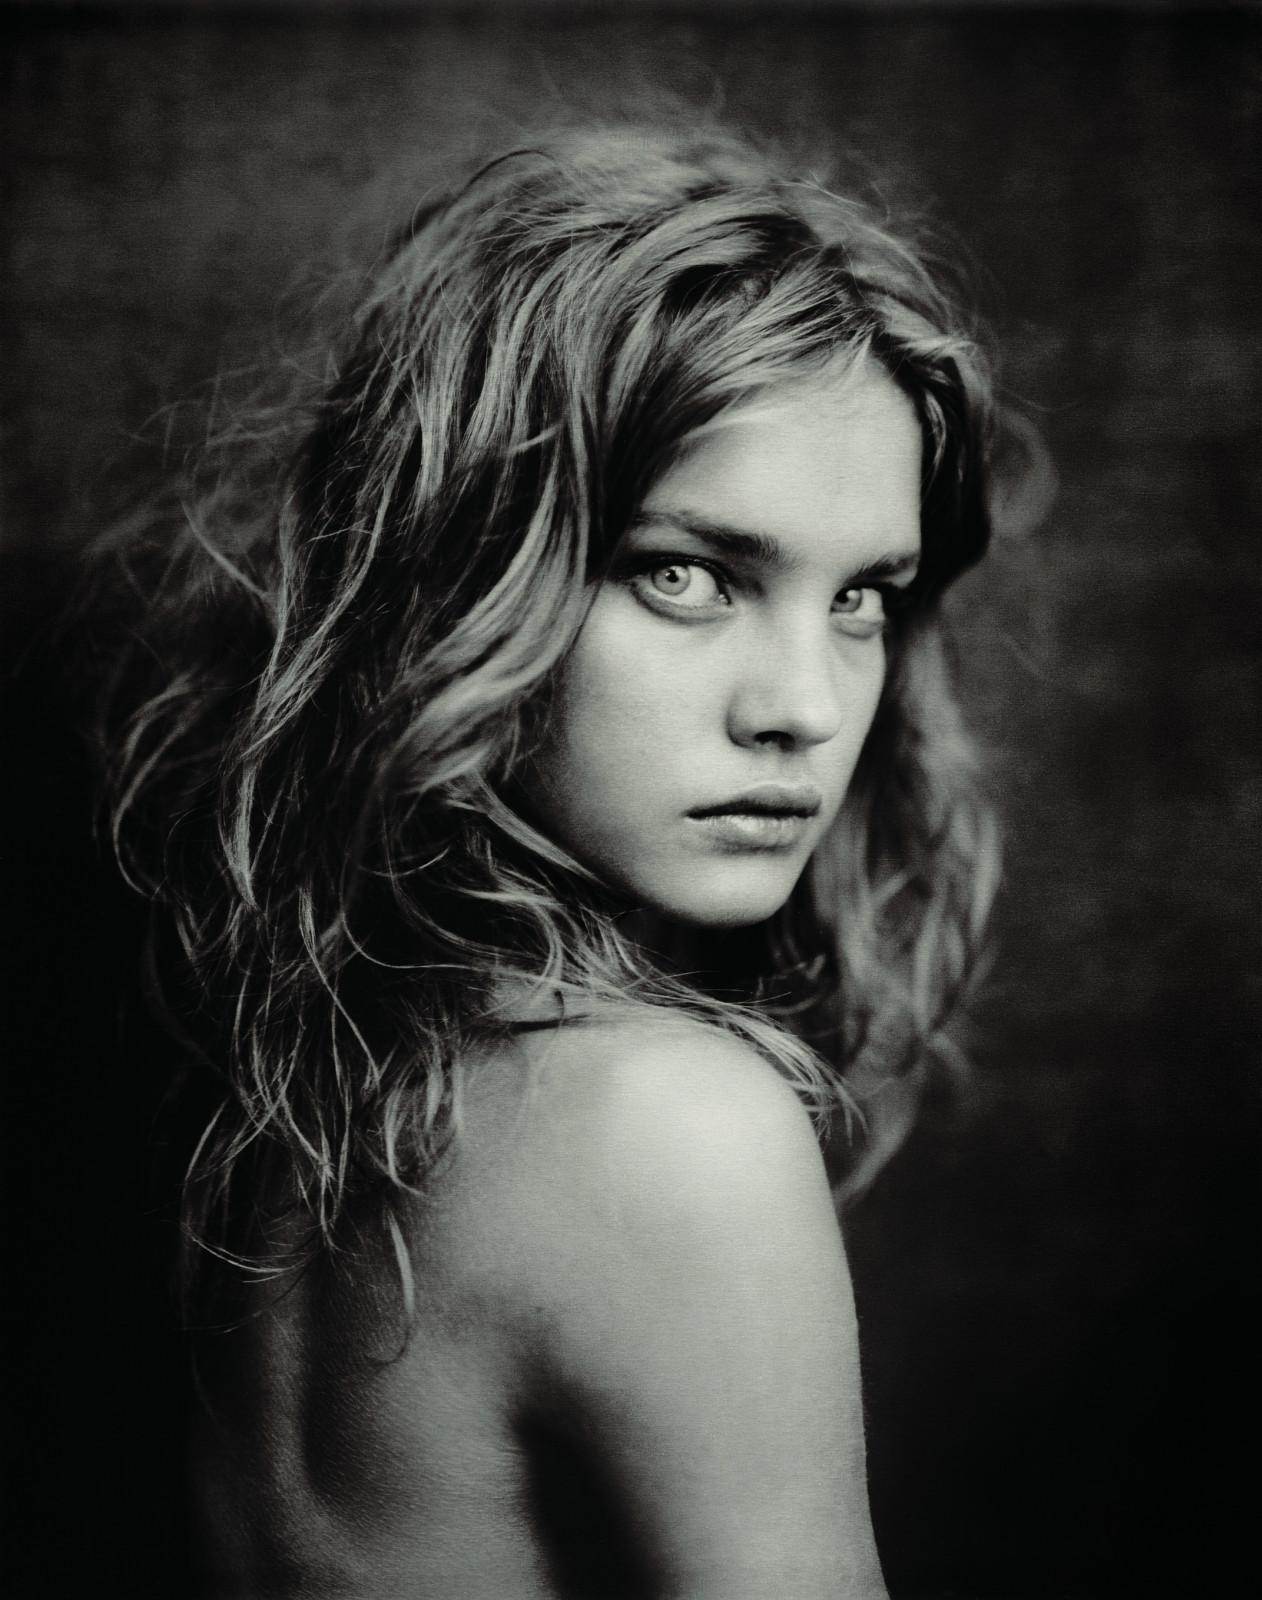 PAOLO ROVERSI - EXHIBITIONS - Les Rencontres d'Arles